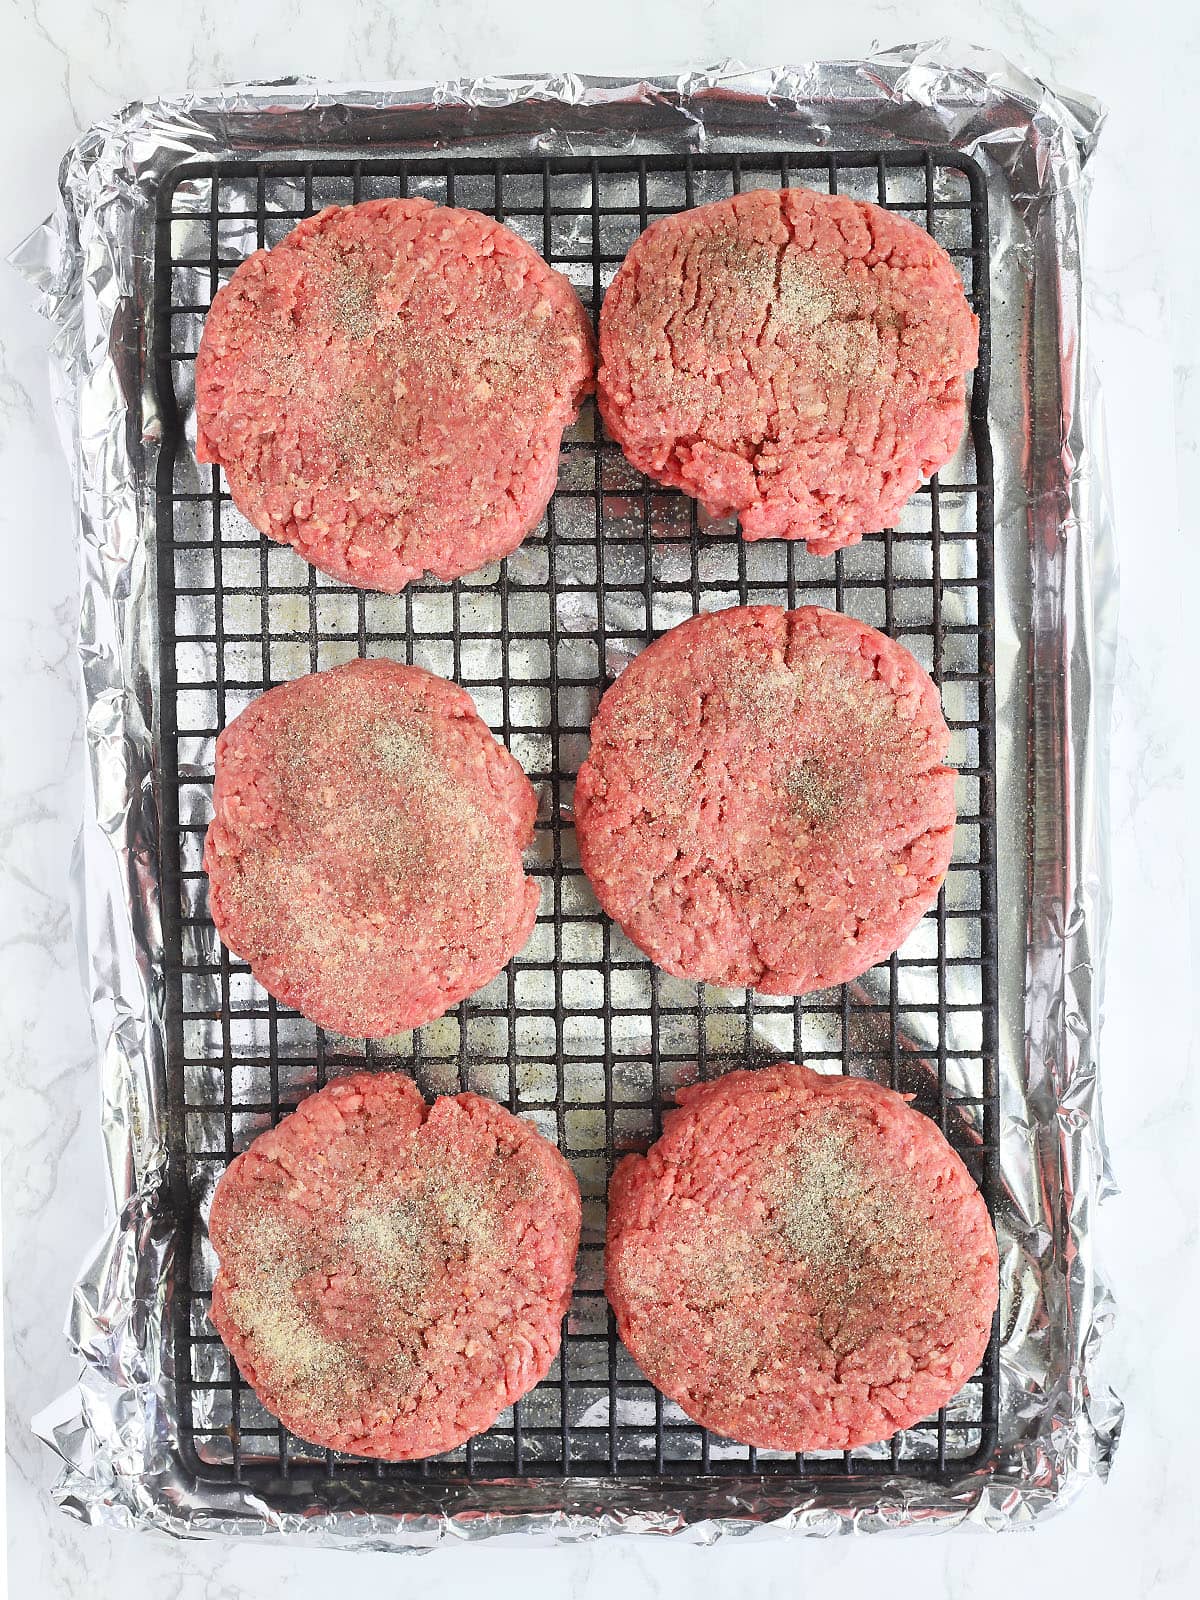 six seasoned uncooked hamburger patties on a baking rack placed over a foil lined baking sheet